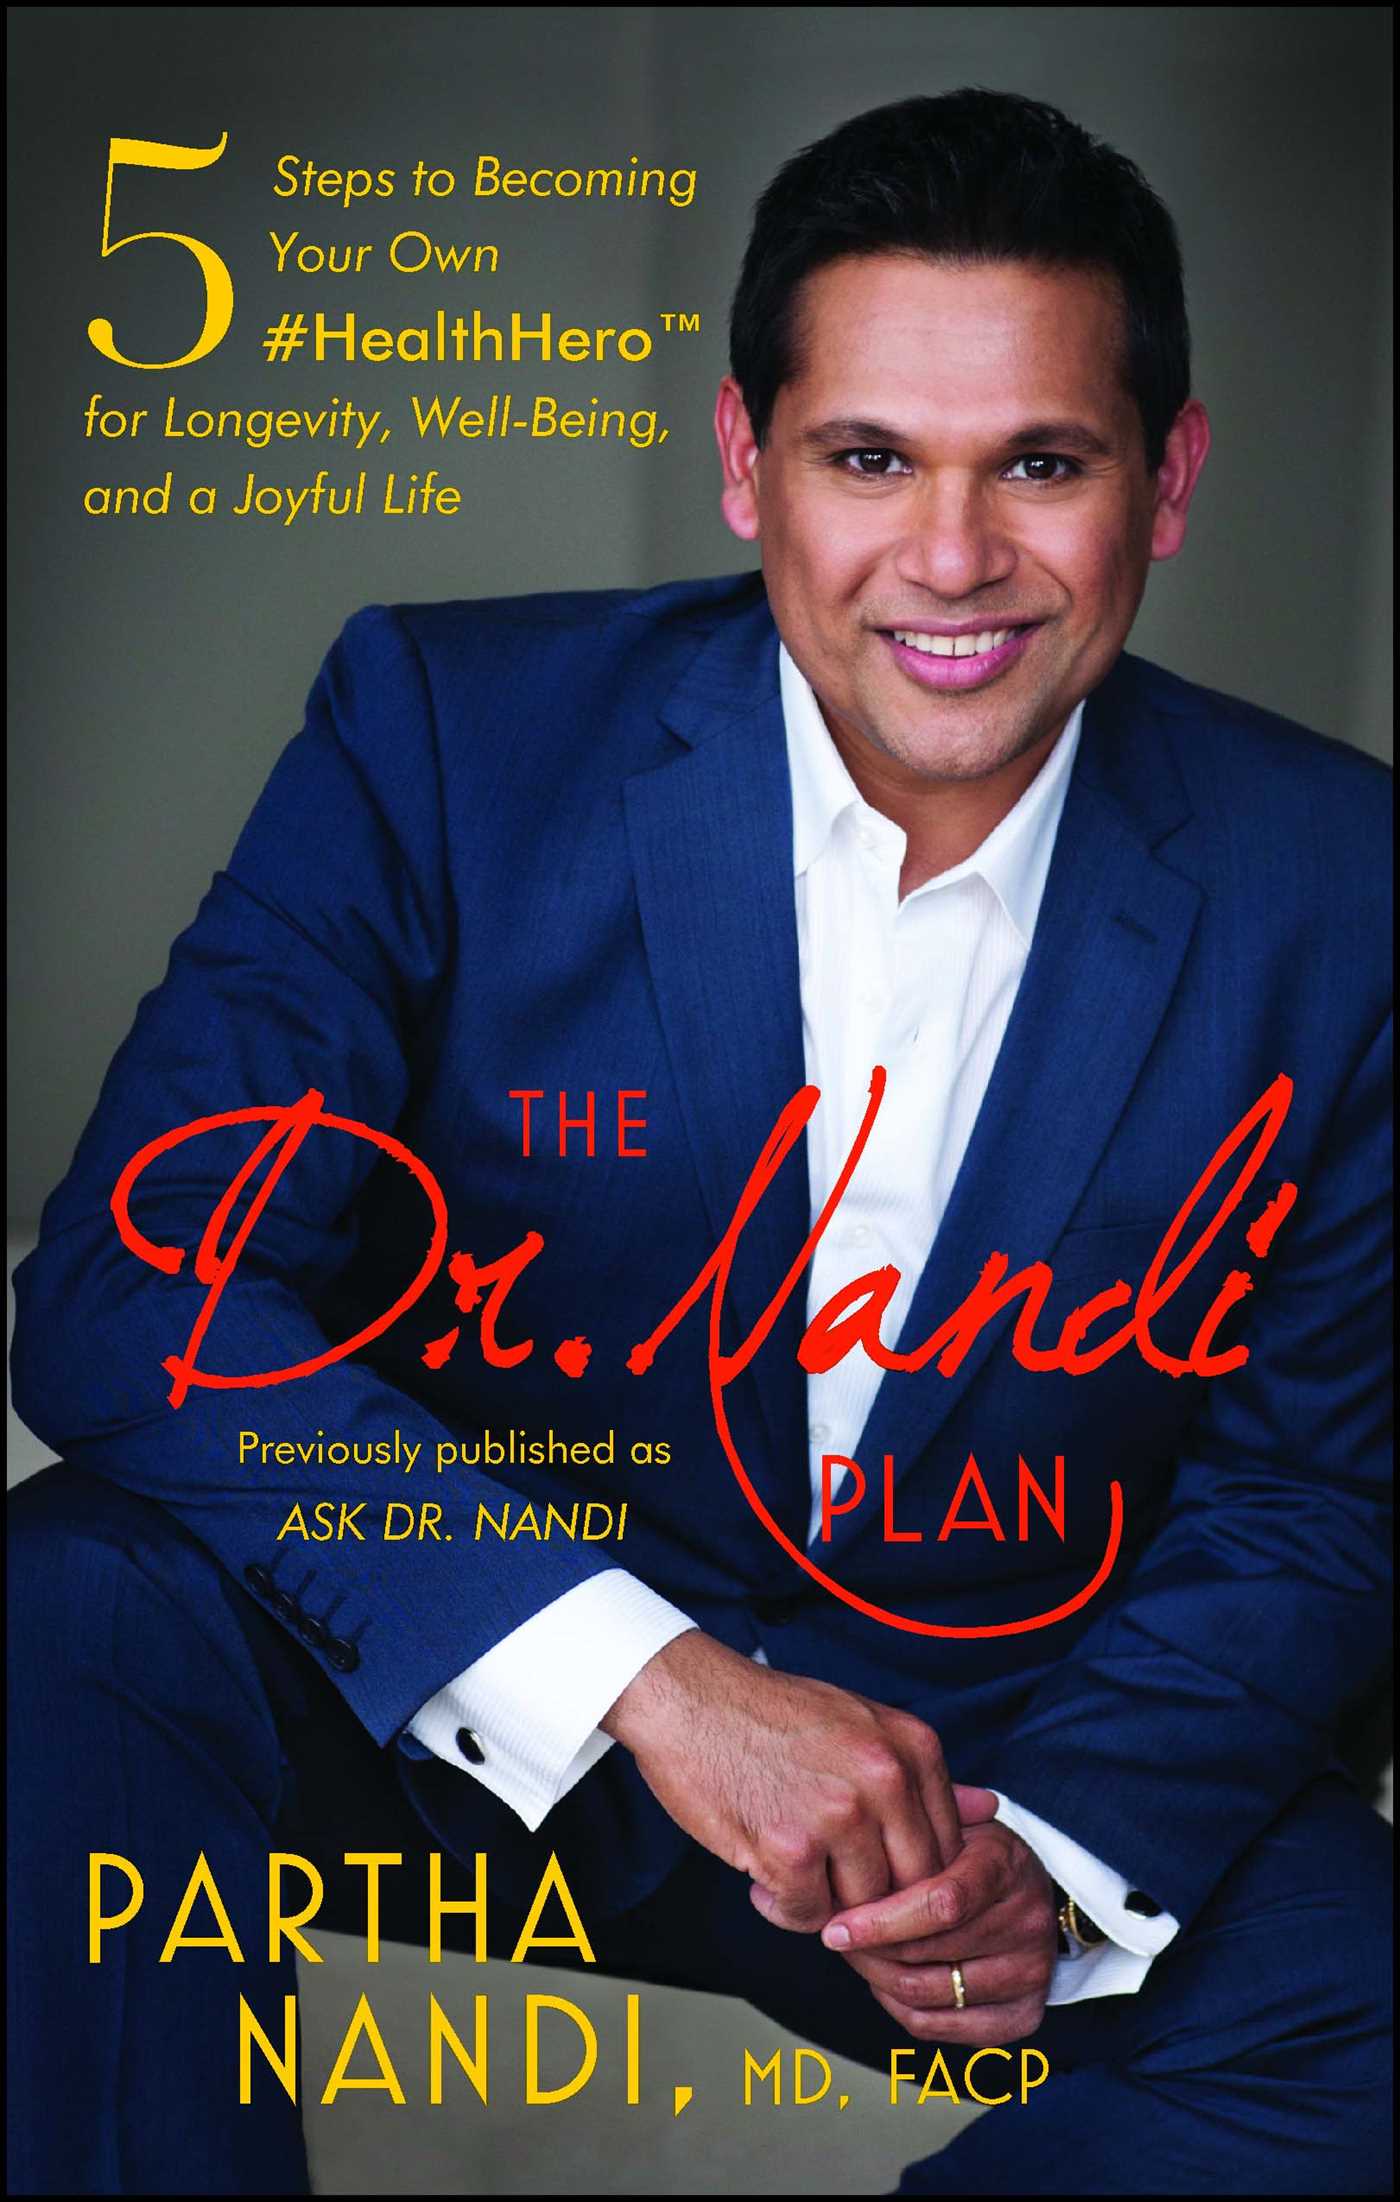 The Dr. Nandi Plan 5 Steps to Becoming Your Own #HealthHero for Longevity, Well-Being, and a Joyful Life cover image